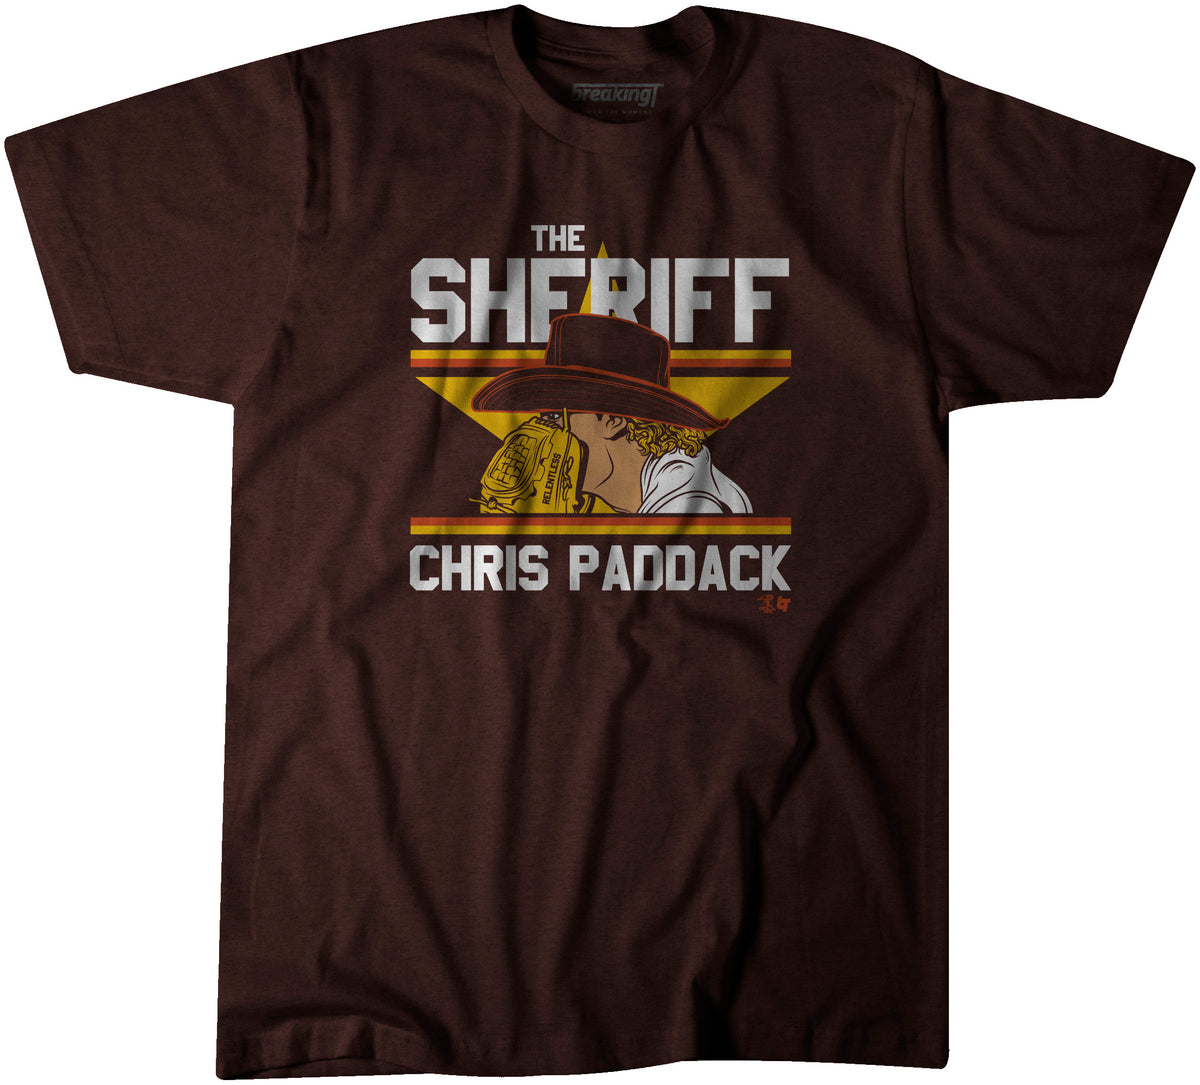  Officially licensed Chris Paddack - The Sheriff T